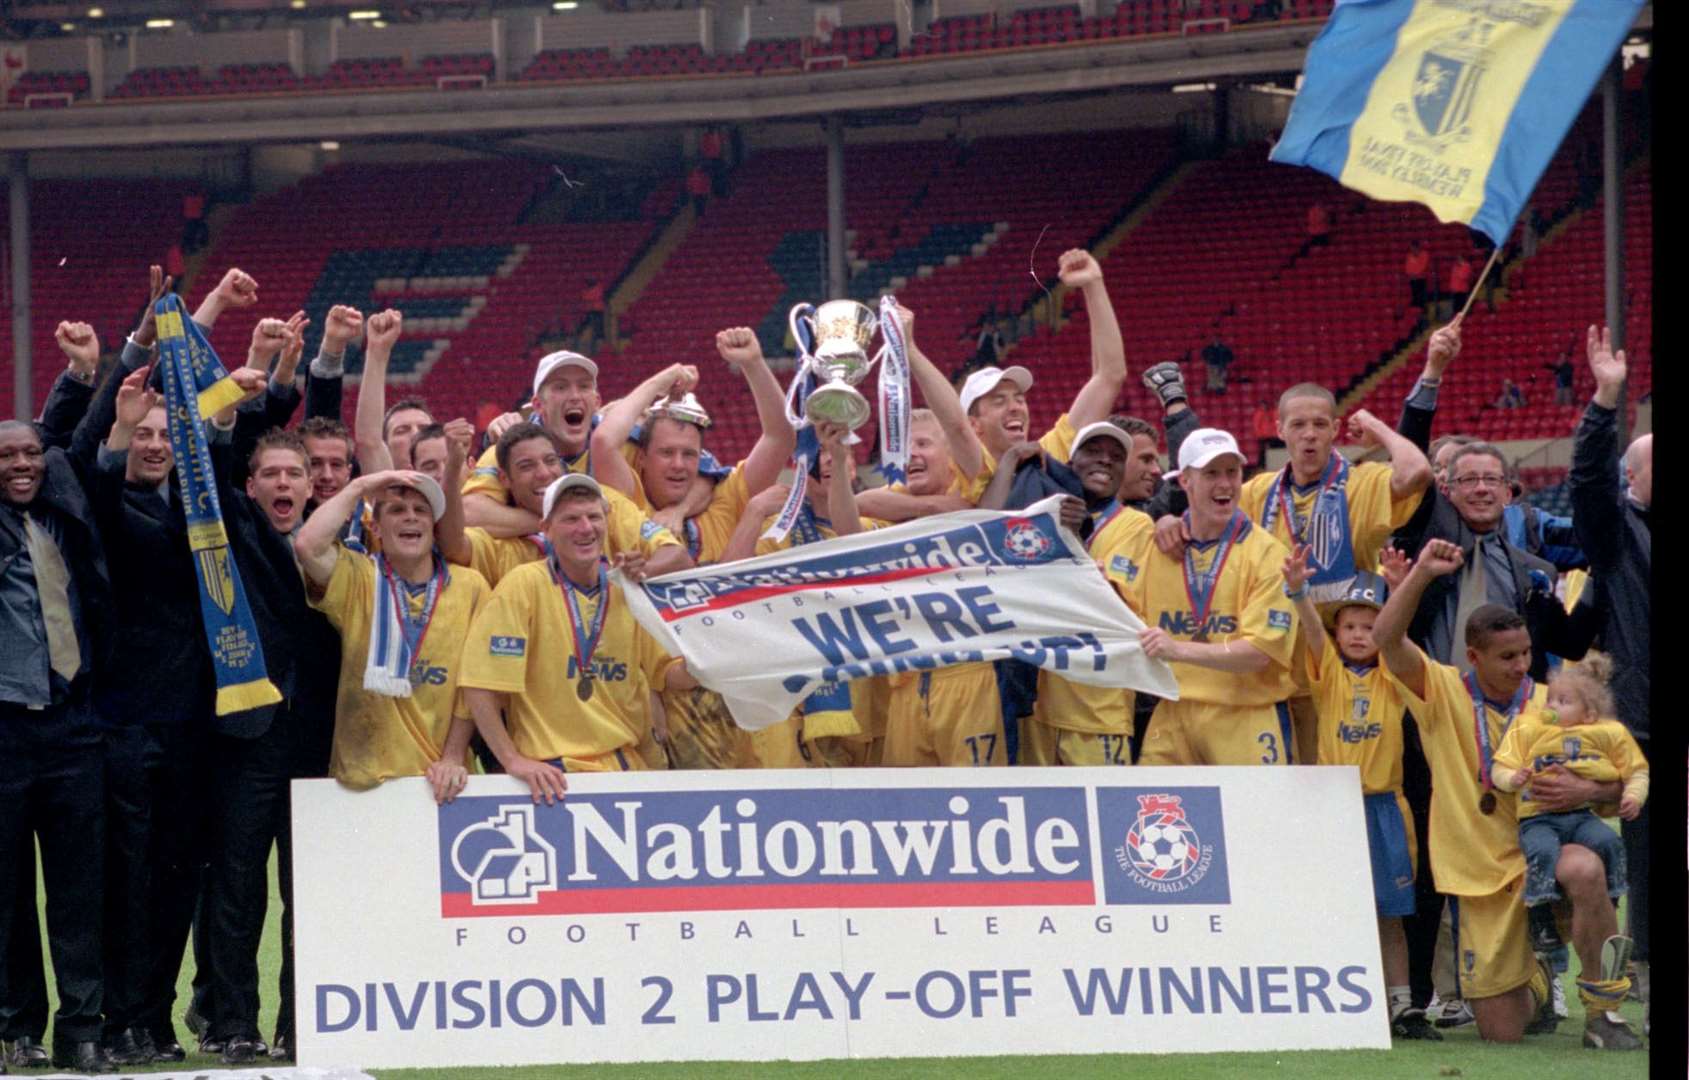 After the agony of defeat against Manchester City the year before, the Gills clinched promotion the following year into what is now the Championship